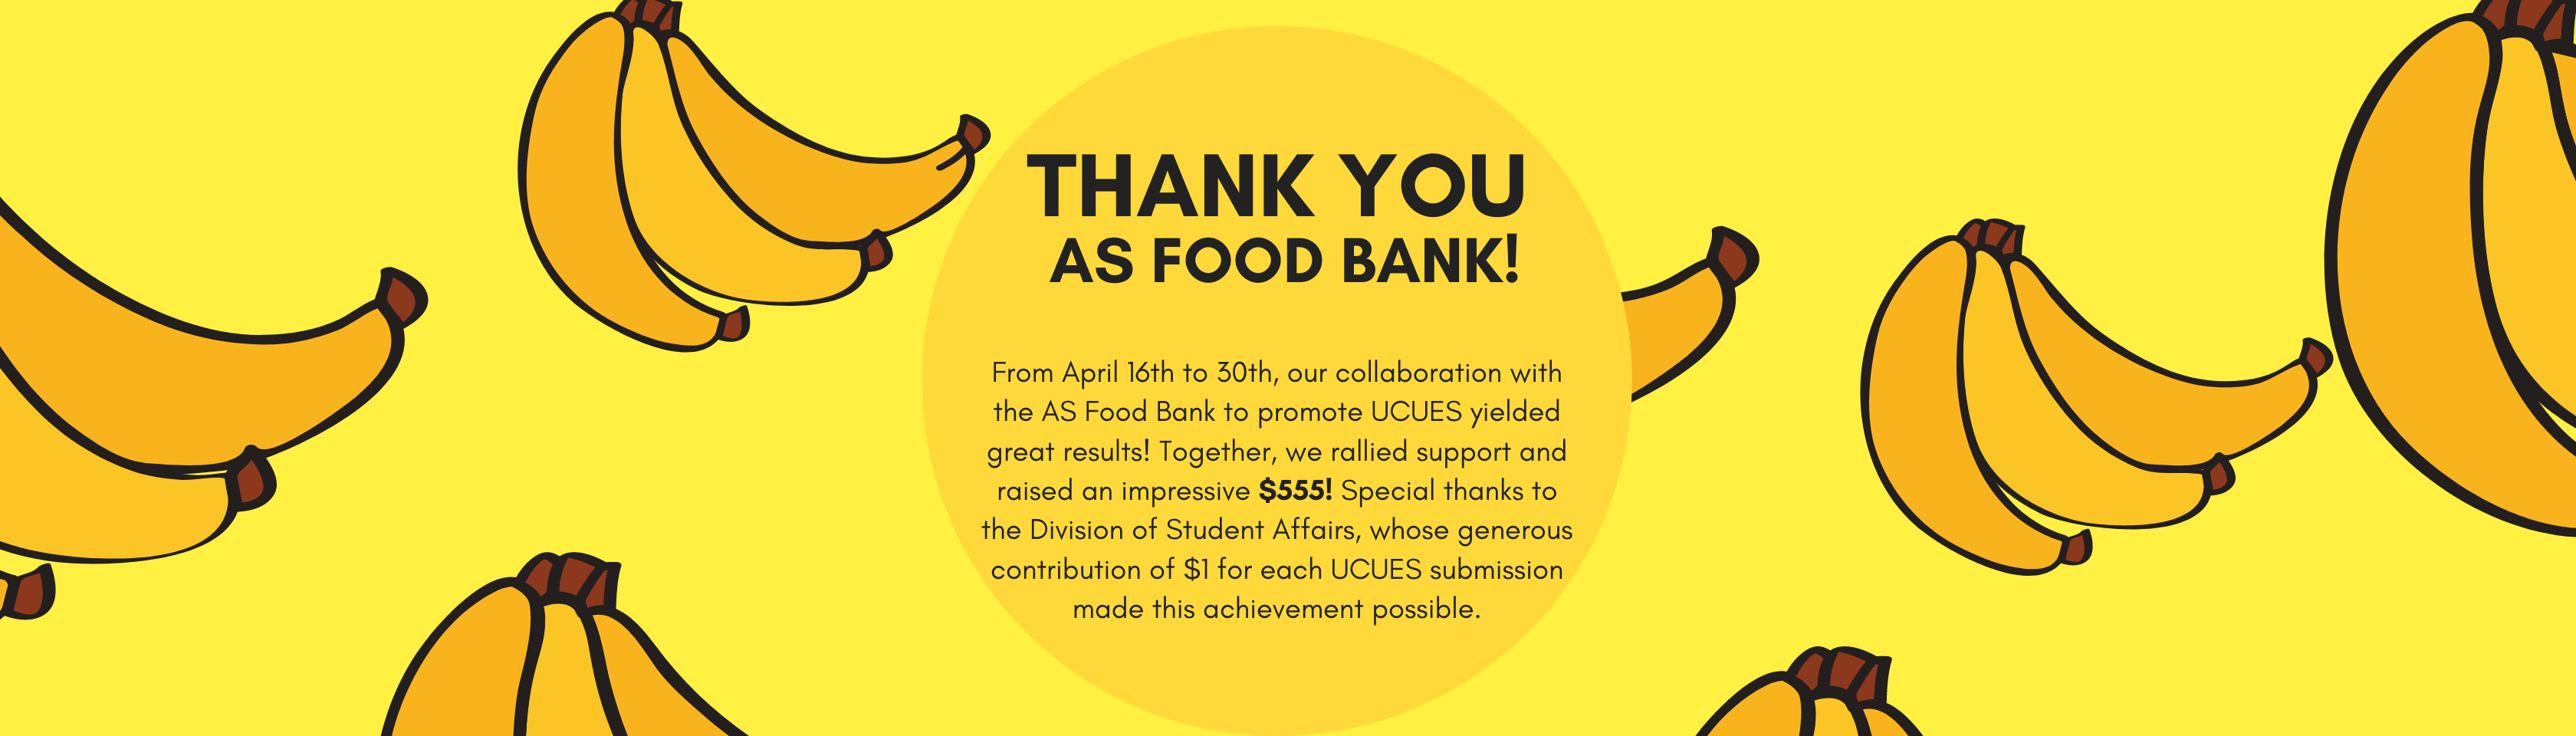 yellow background with graphics of banana bunches and a circle in the middle with text thanking the associated students food bank